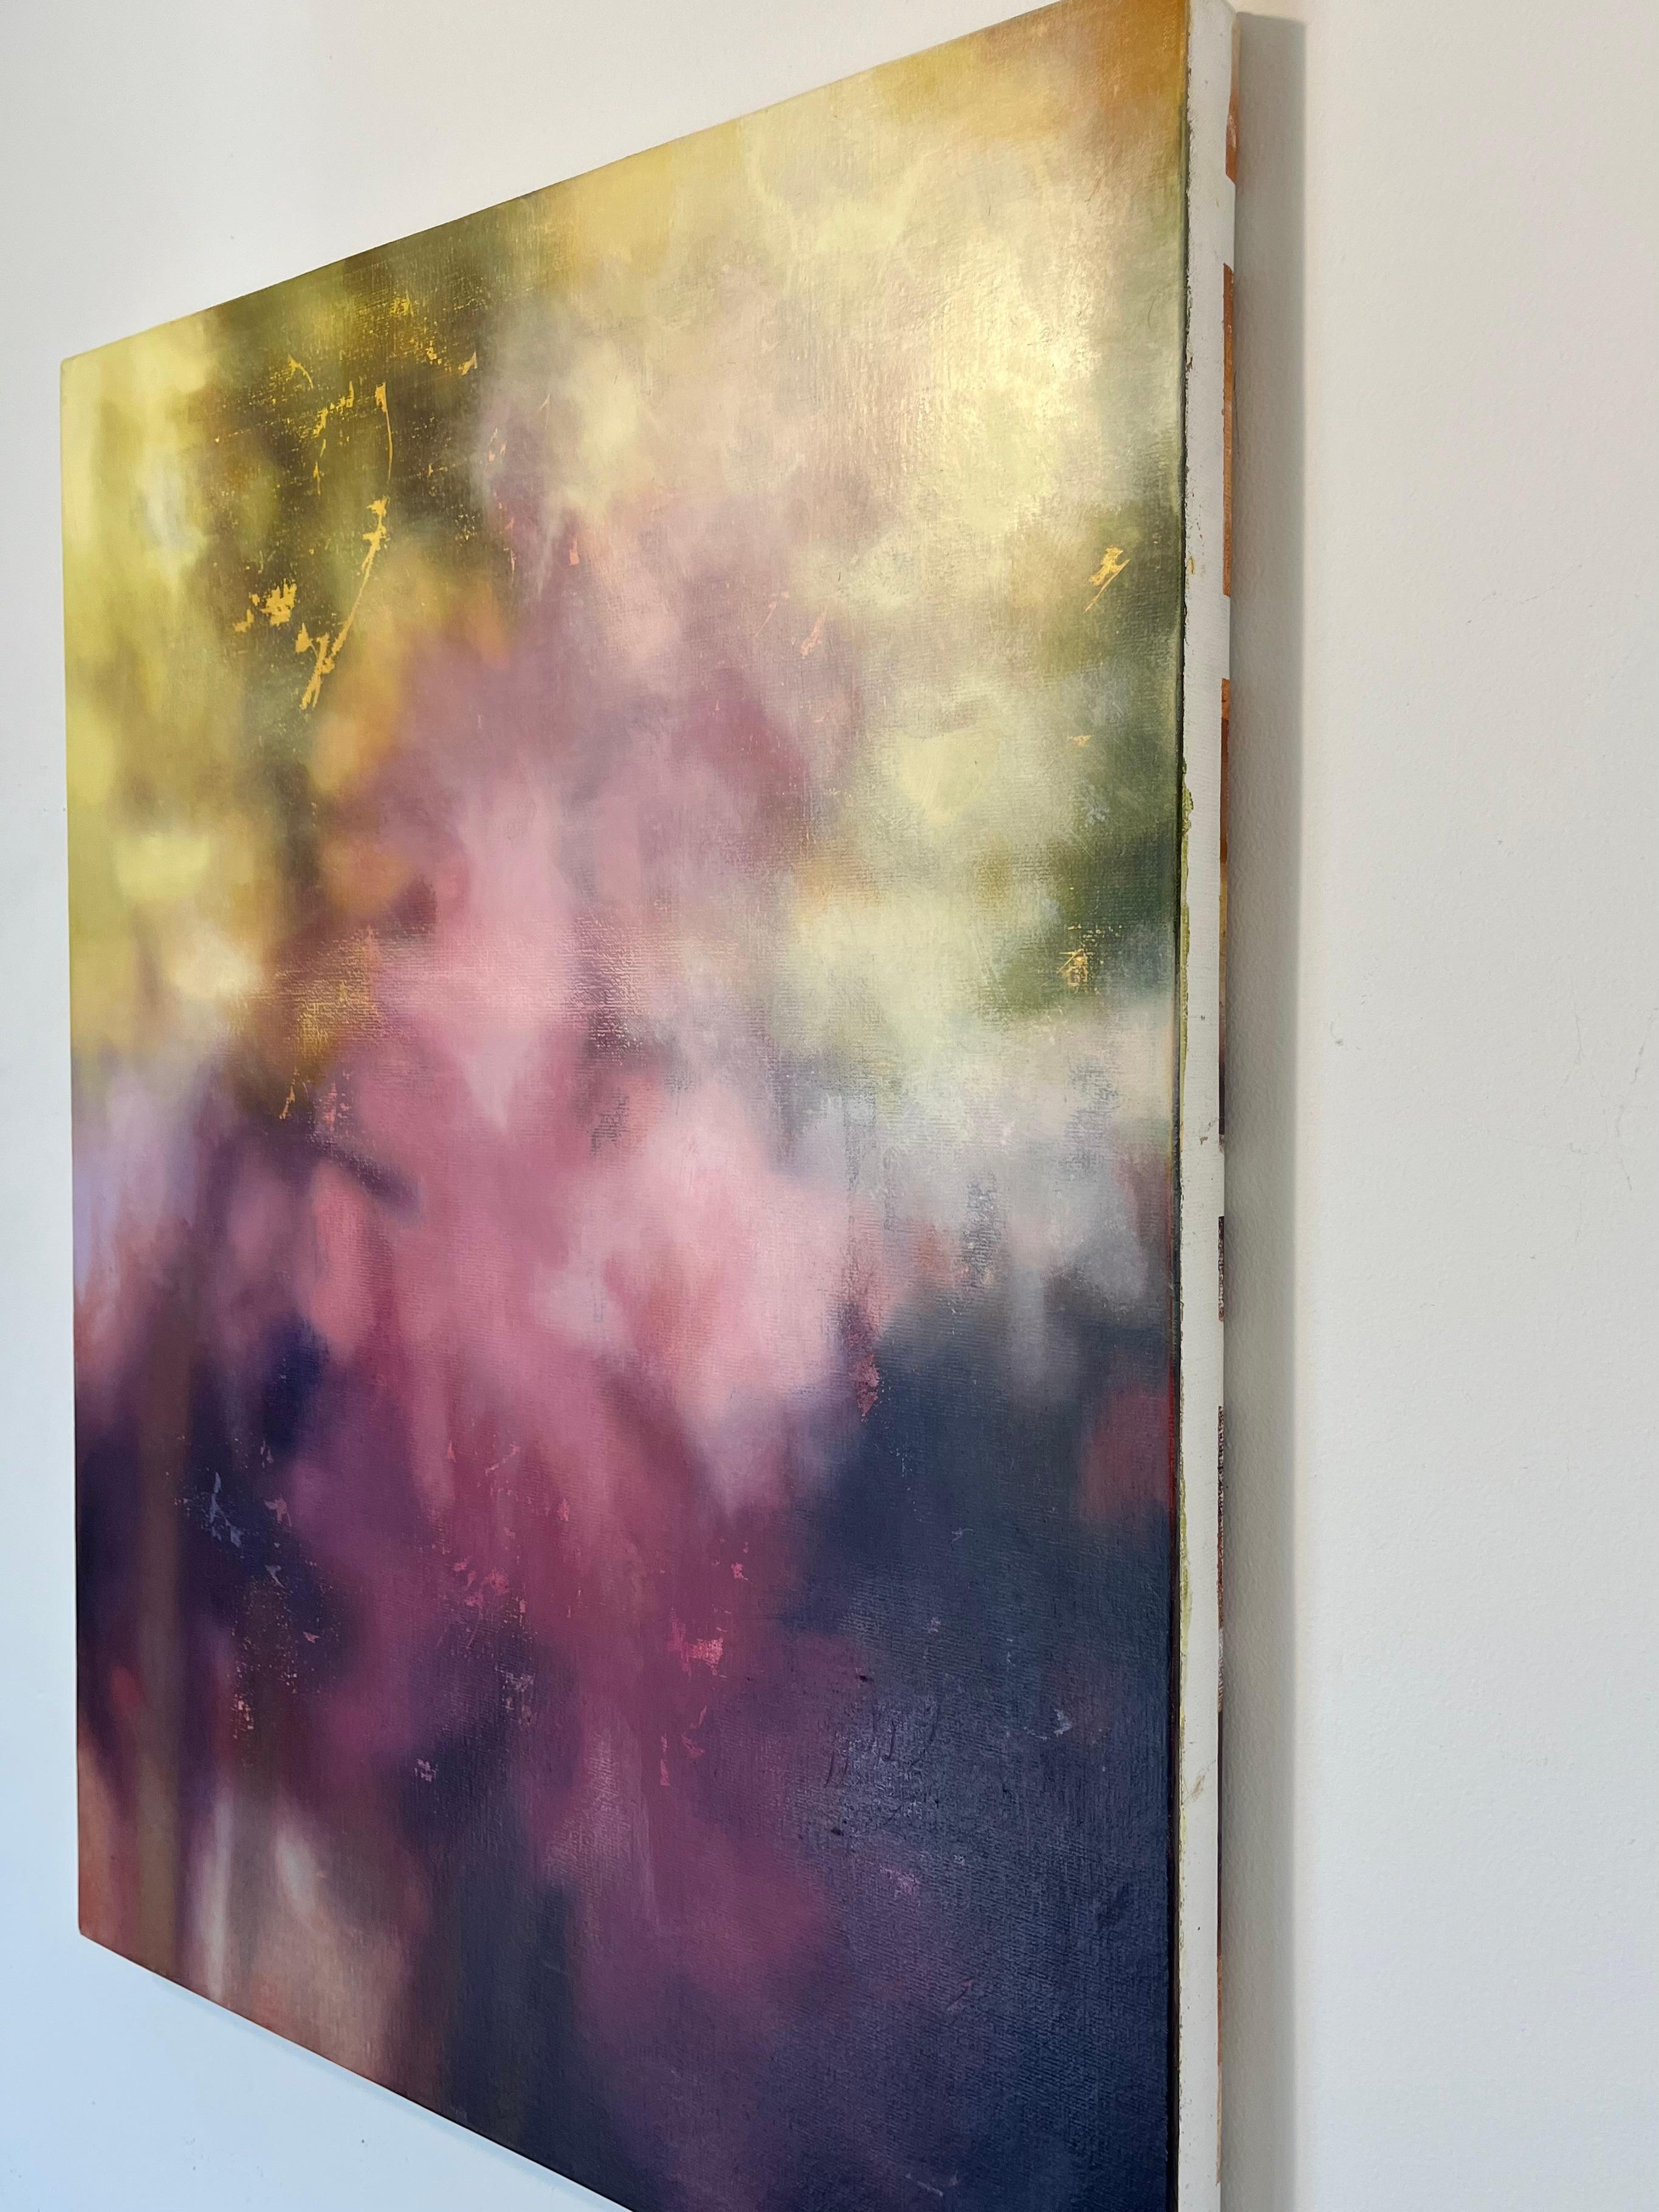 Afternoon Light
Description: Oil on linen, purple, pink, gestural, modern, abstract

This abstract painting tells a story of the light streaming through the window late in the afternoon. It’s glowing use of color and light create the sense of warmth